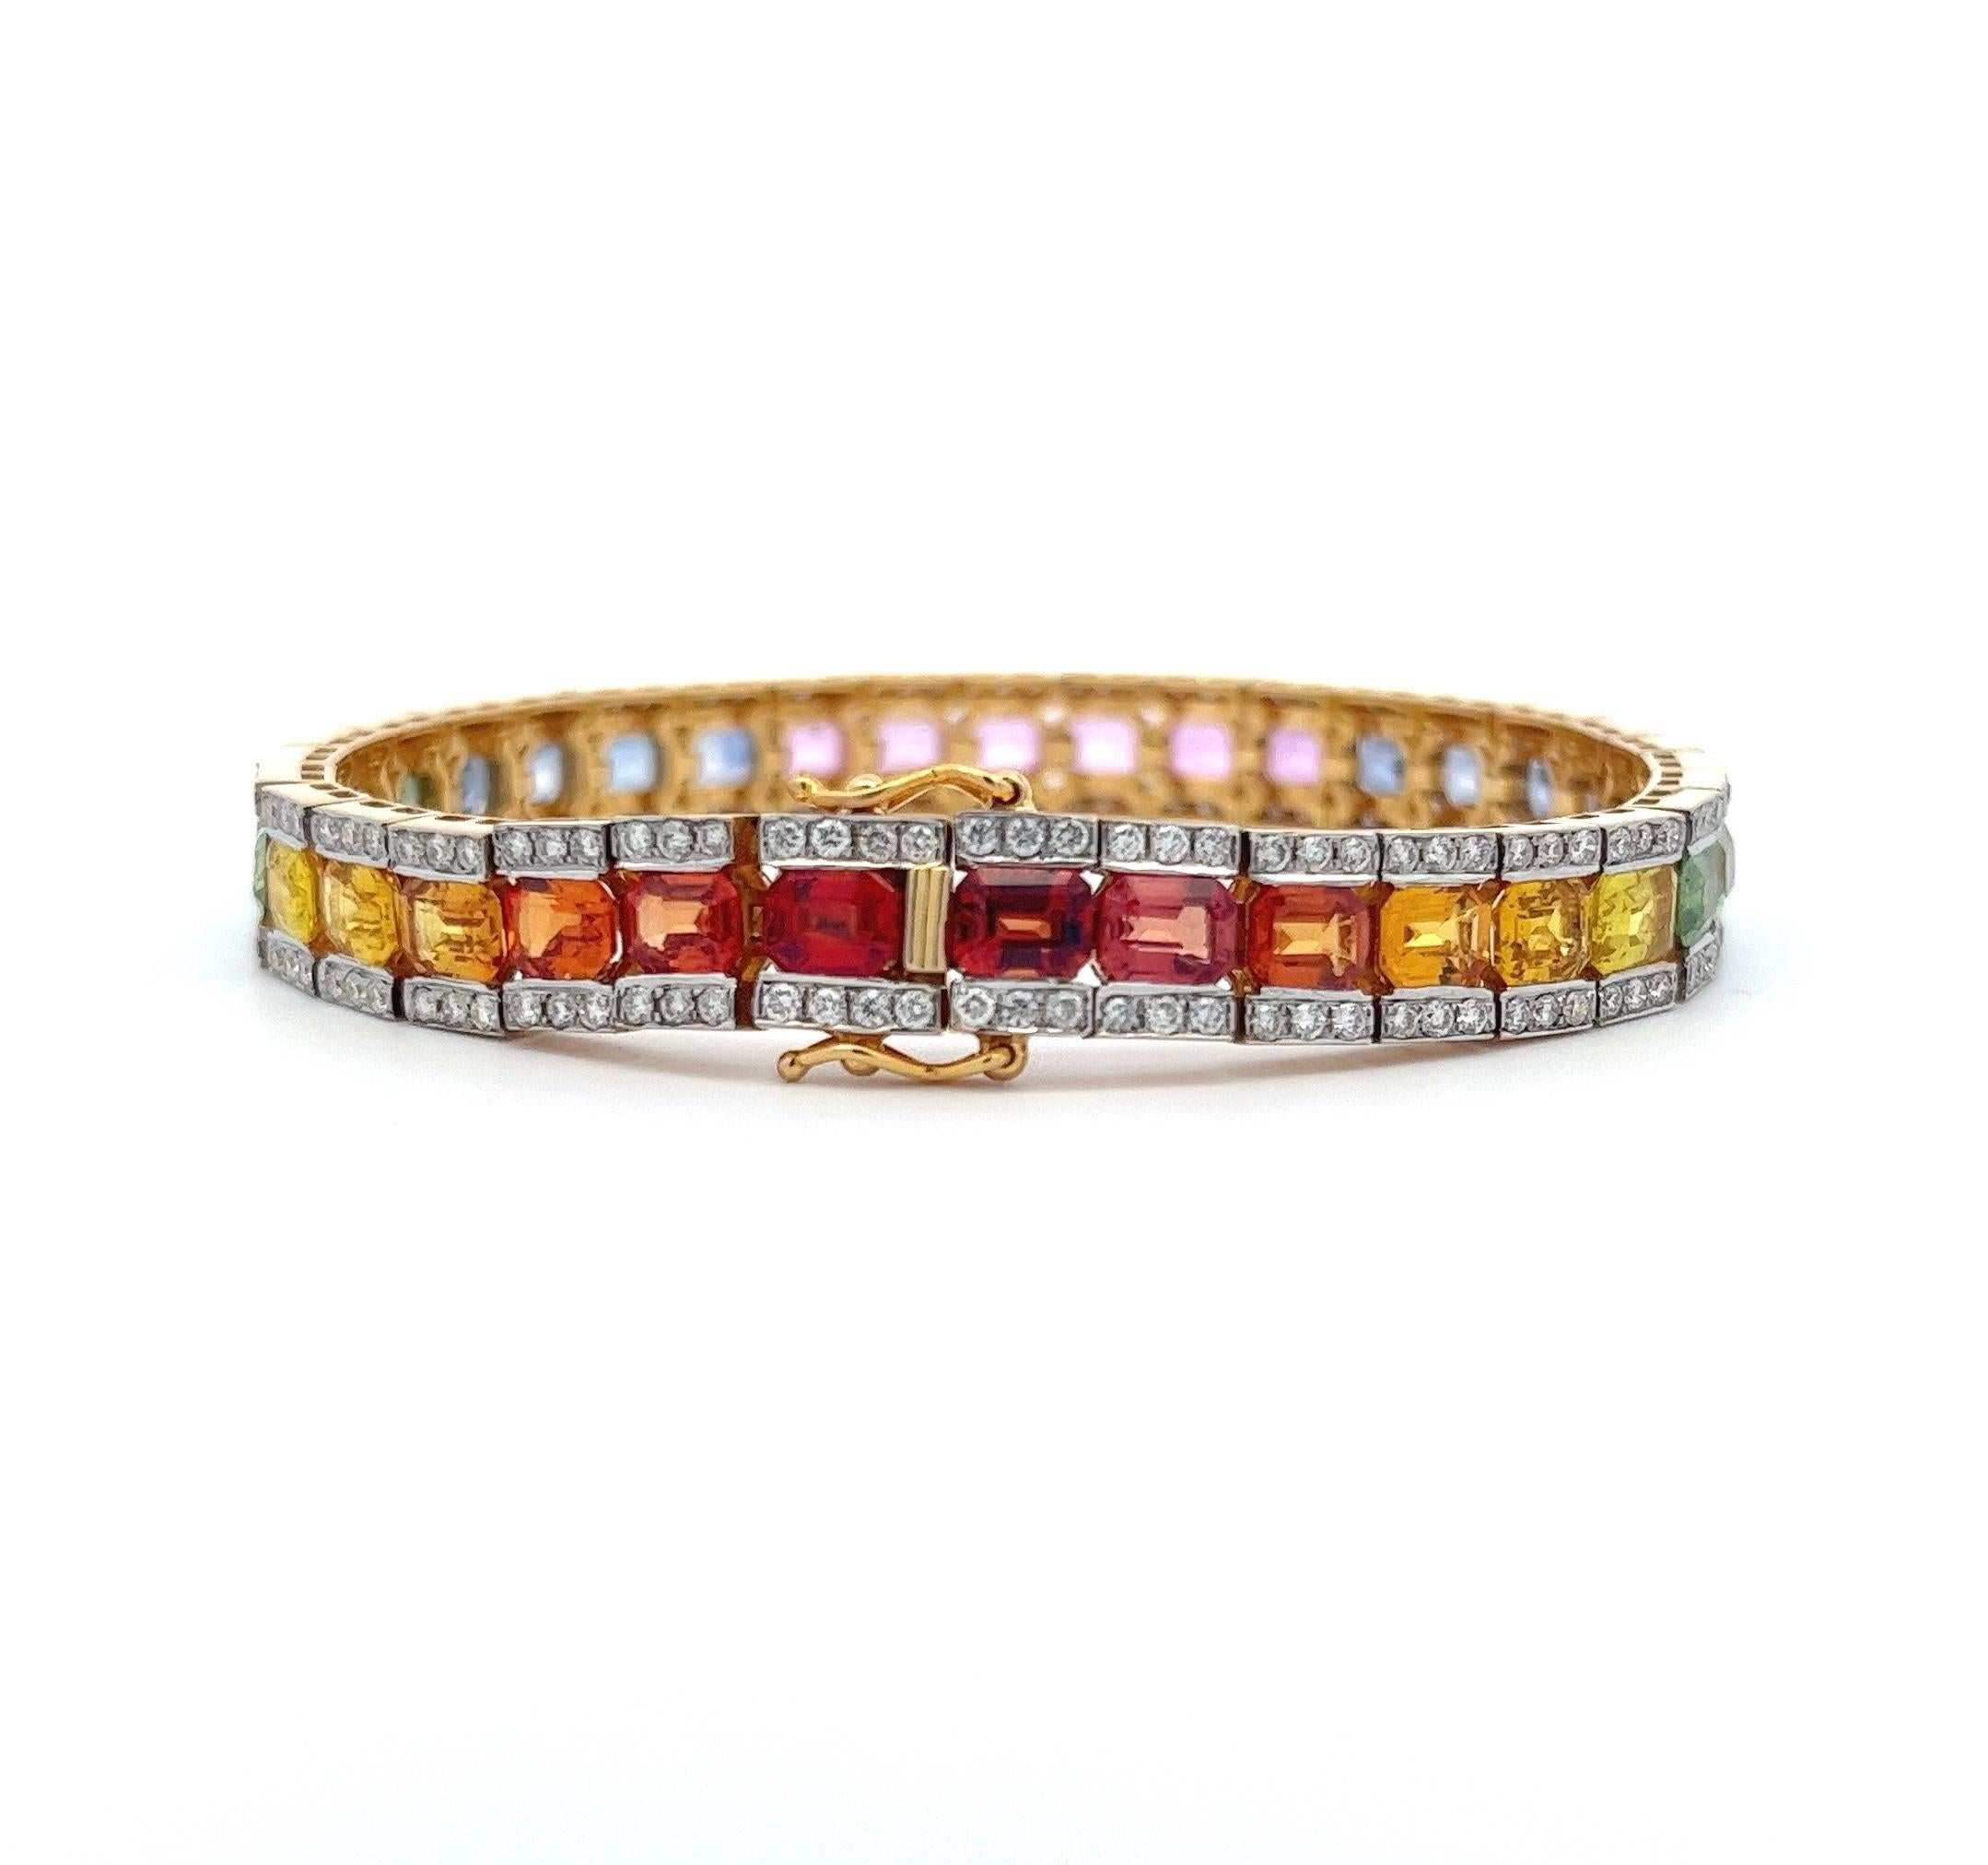 This multi-color graduated sapphire and diamond bracelet is a truly luxurious and highly collectible piece of jewelry, designed to captivate and delight the senses. With a total of 204 diamonds, amounting to 4.08 carats, and 34 sapphires, totaling